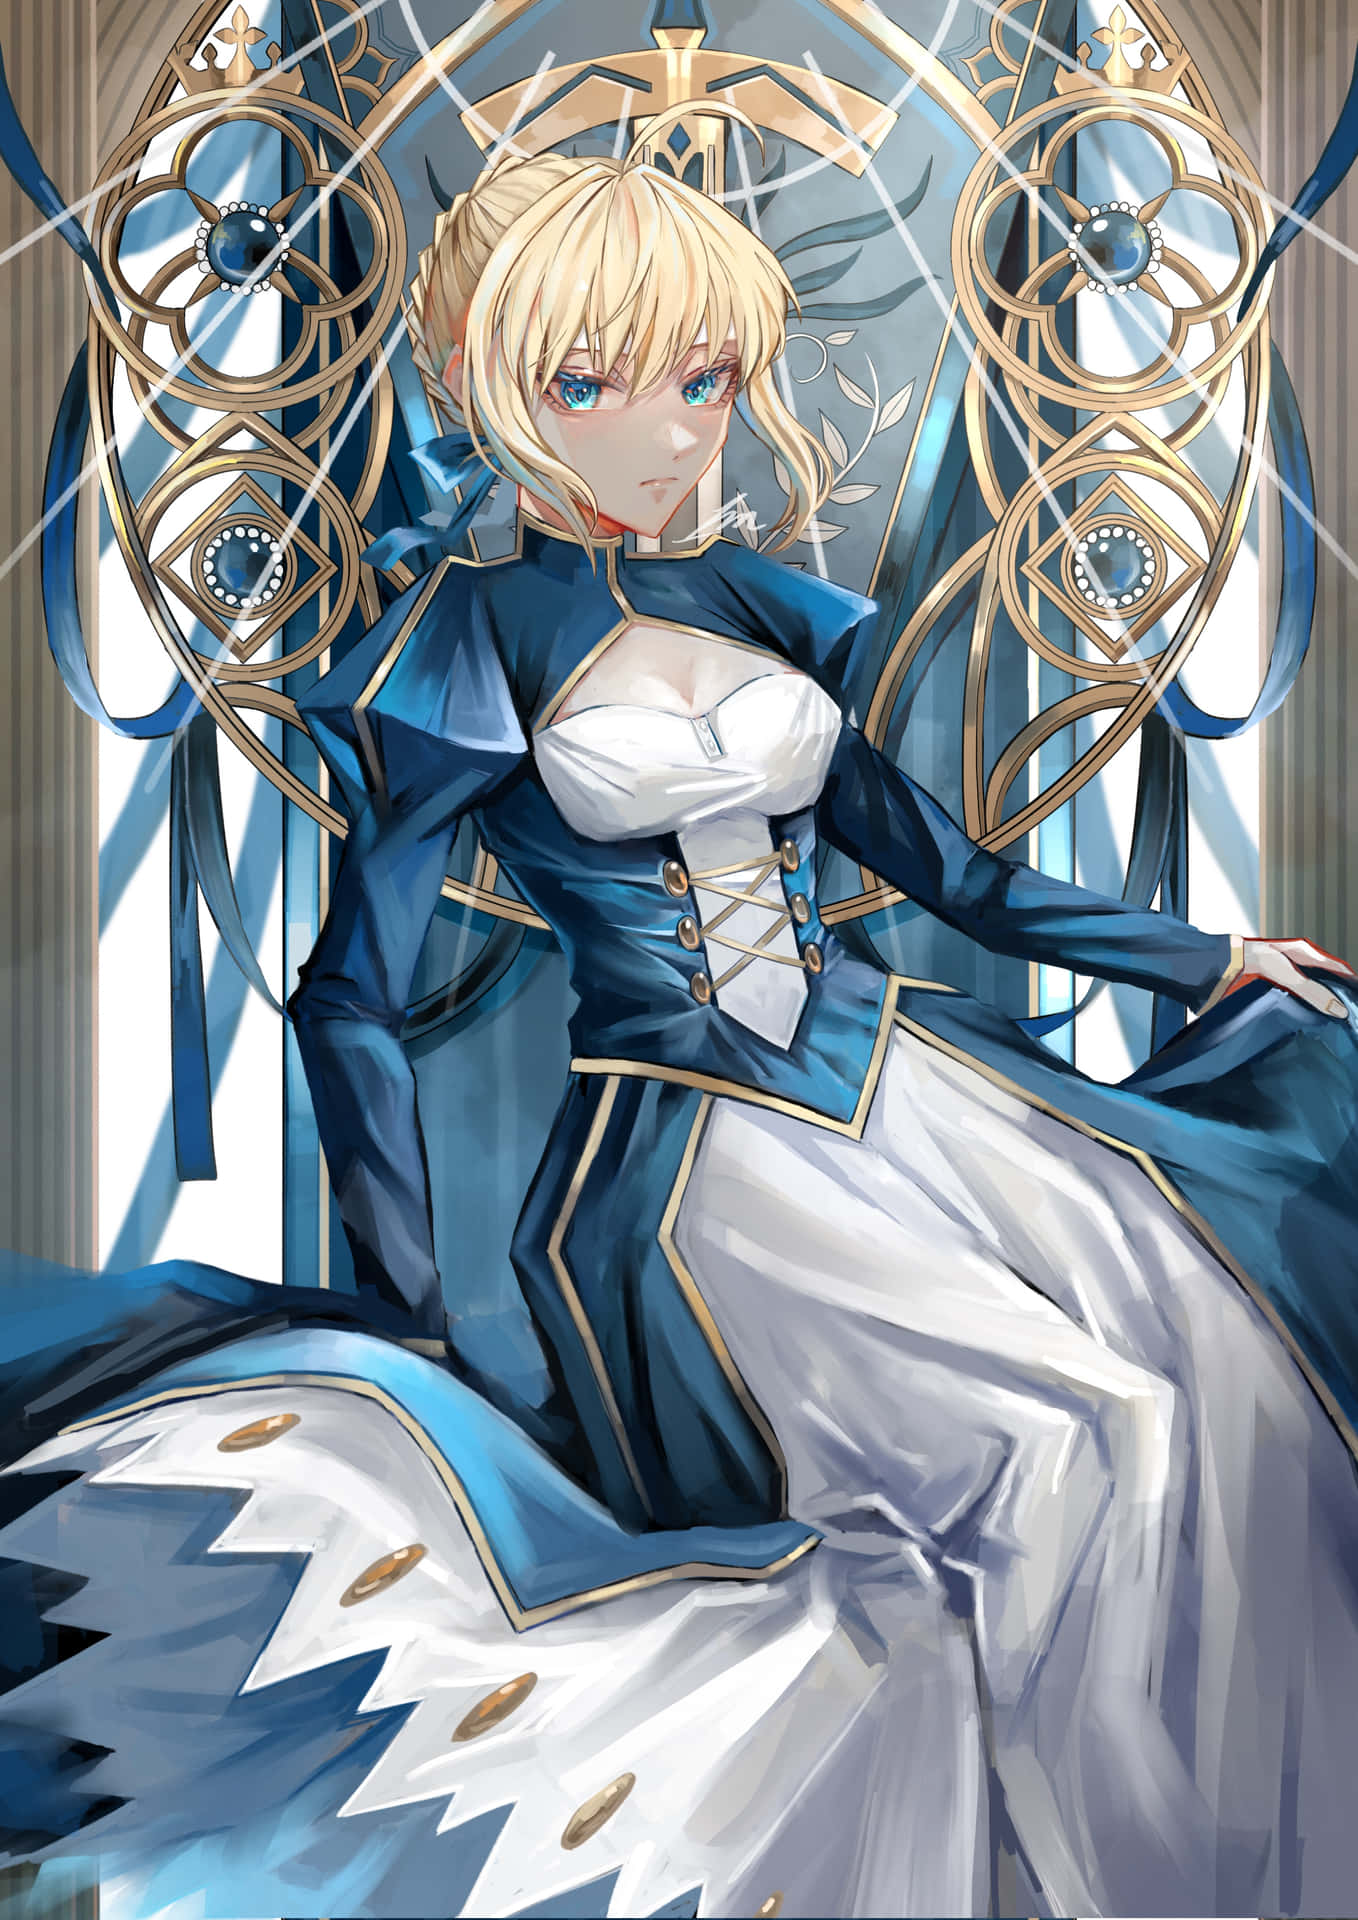 Download wallpapers 4k, Saber, forest, art, TYPE-MOON, manga, Fate